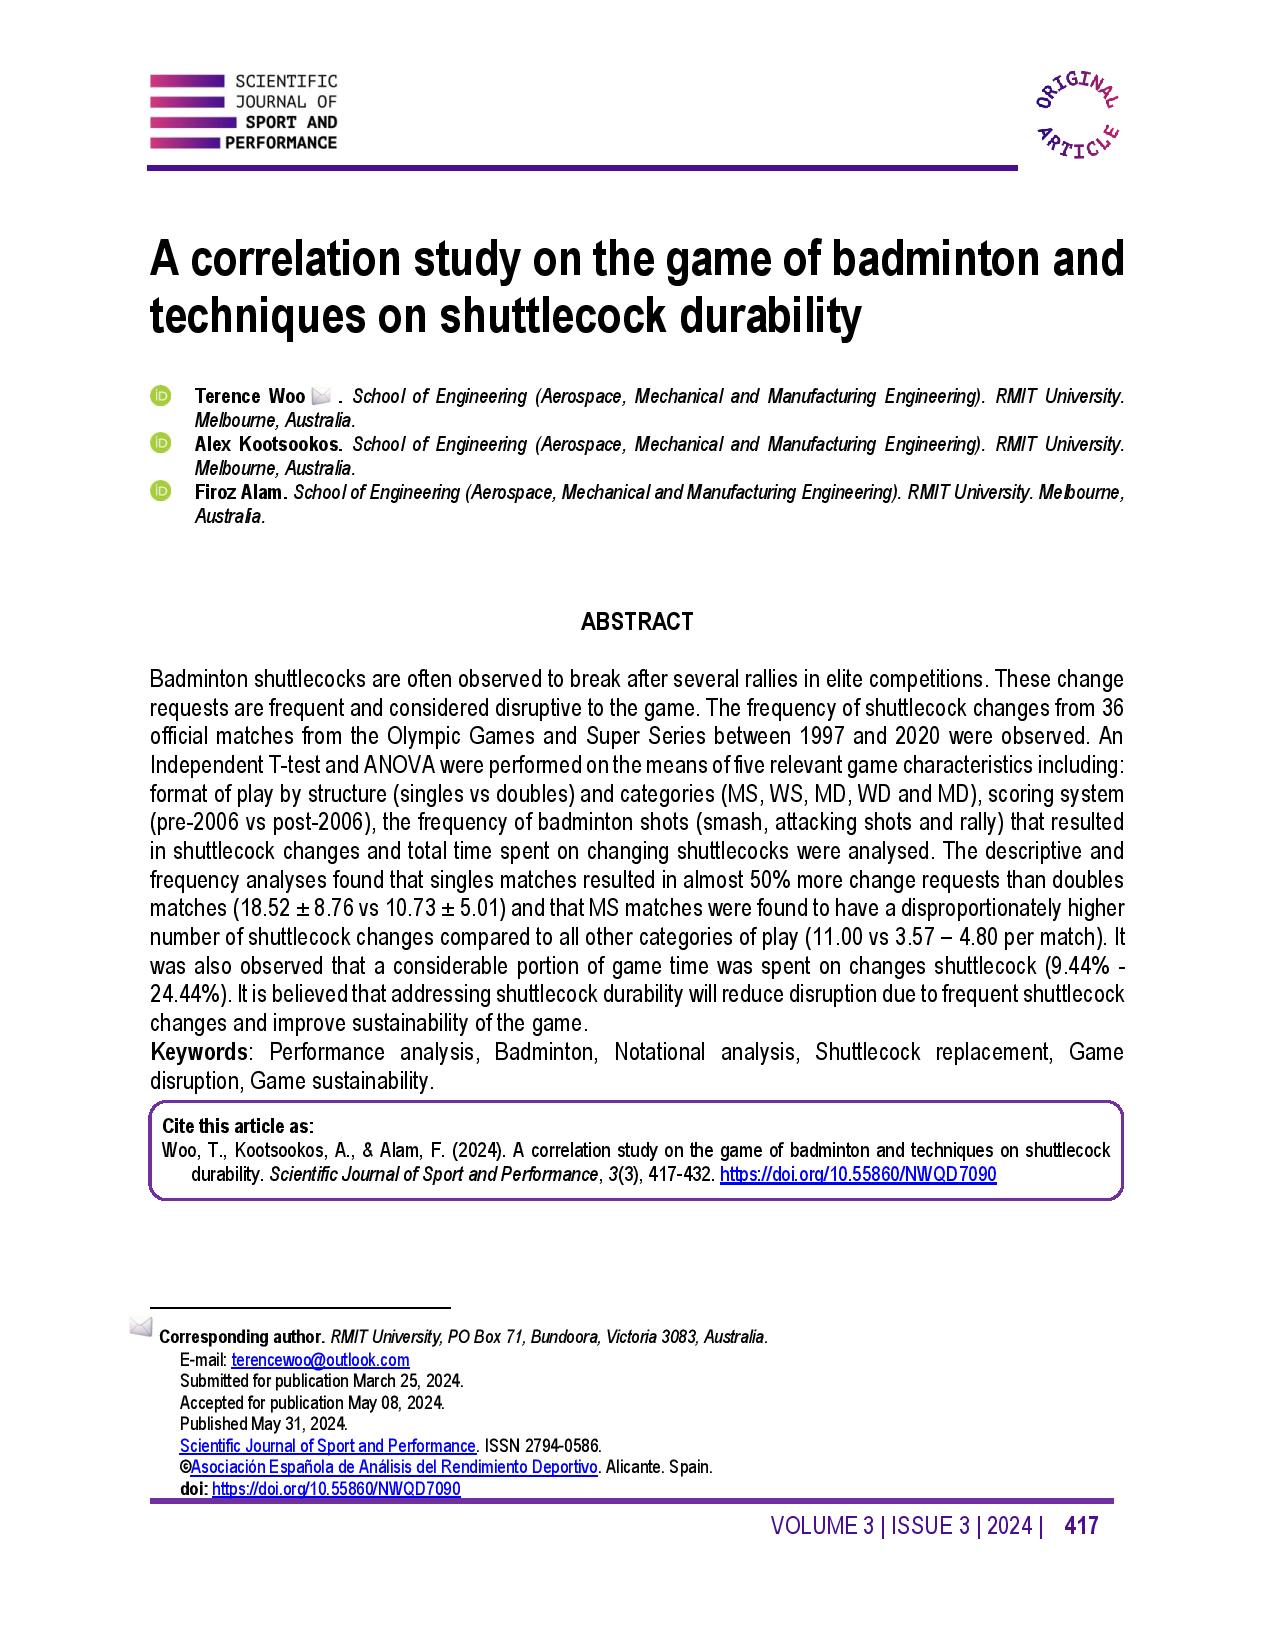 A correlation study on the game of badminton and techniques on shuttlecock durability